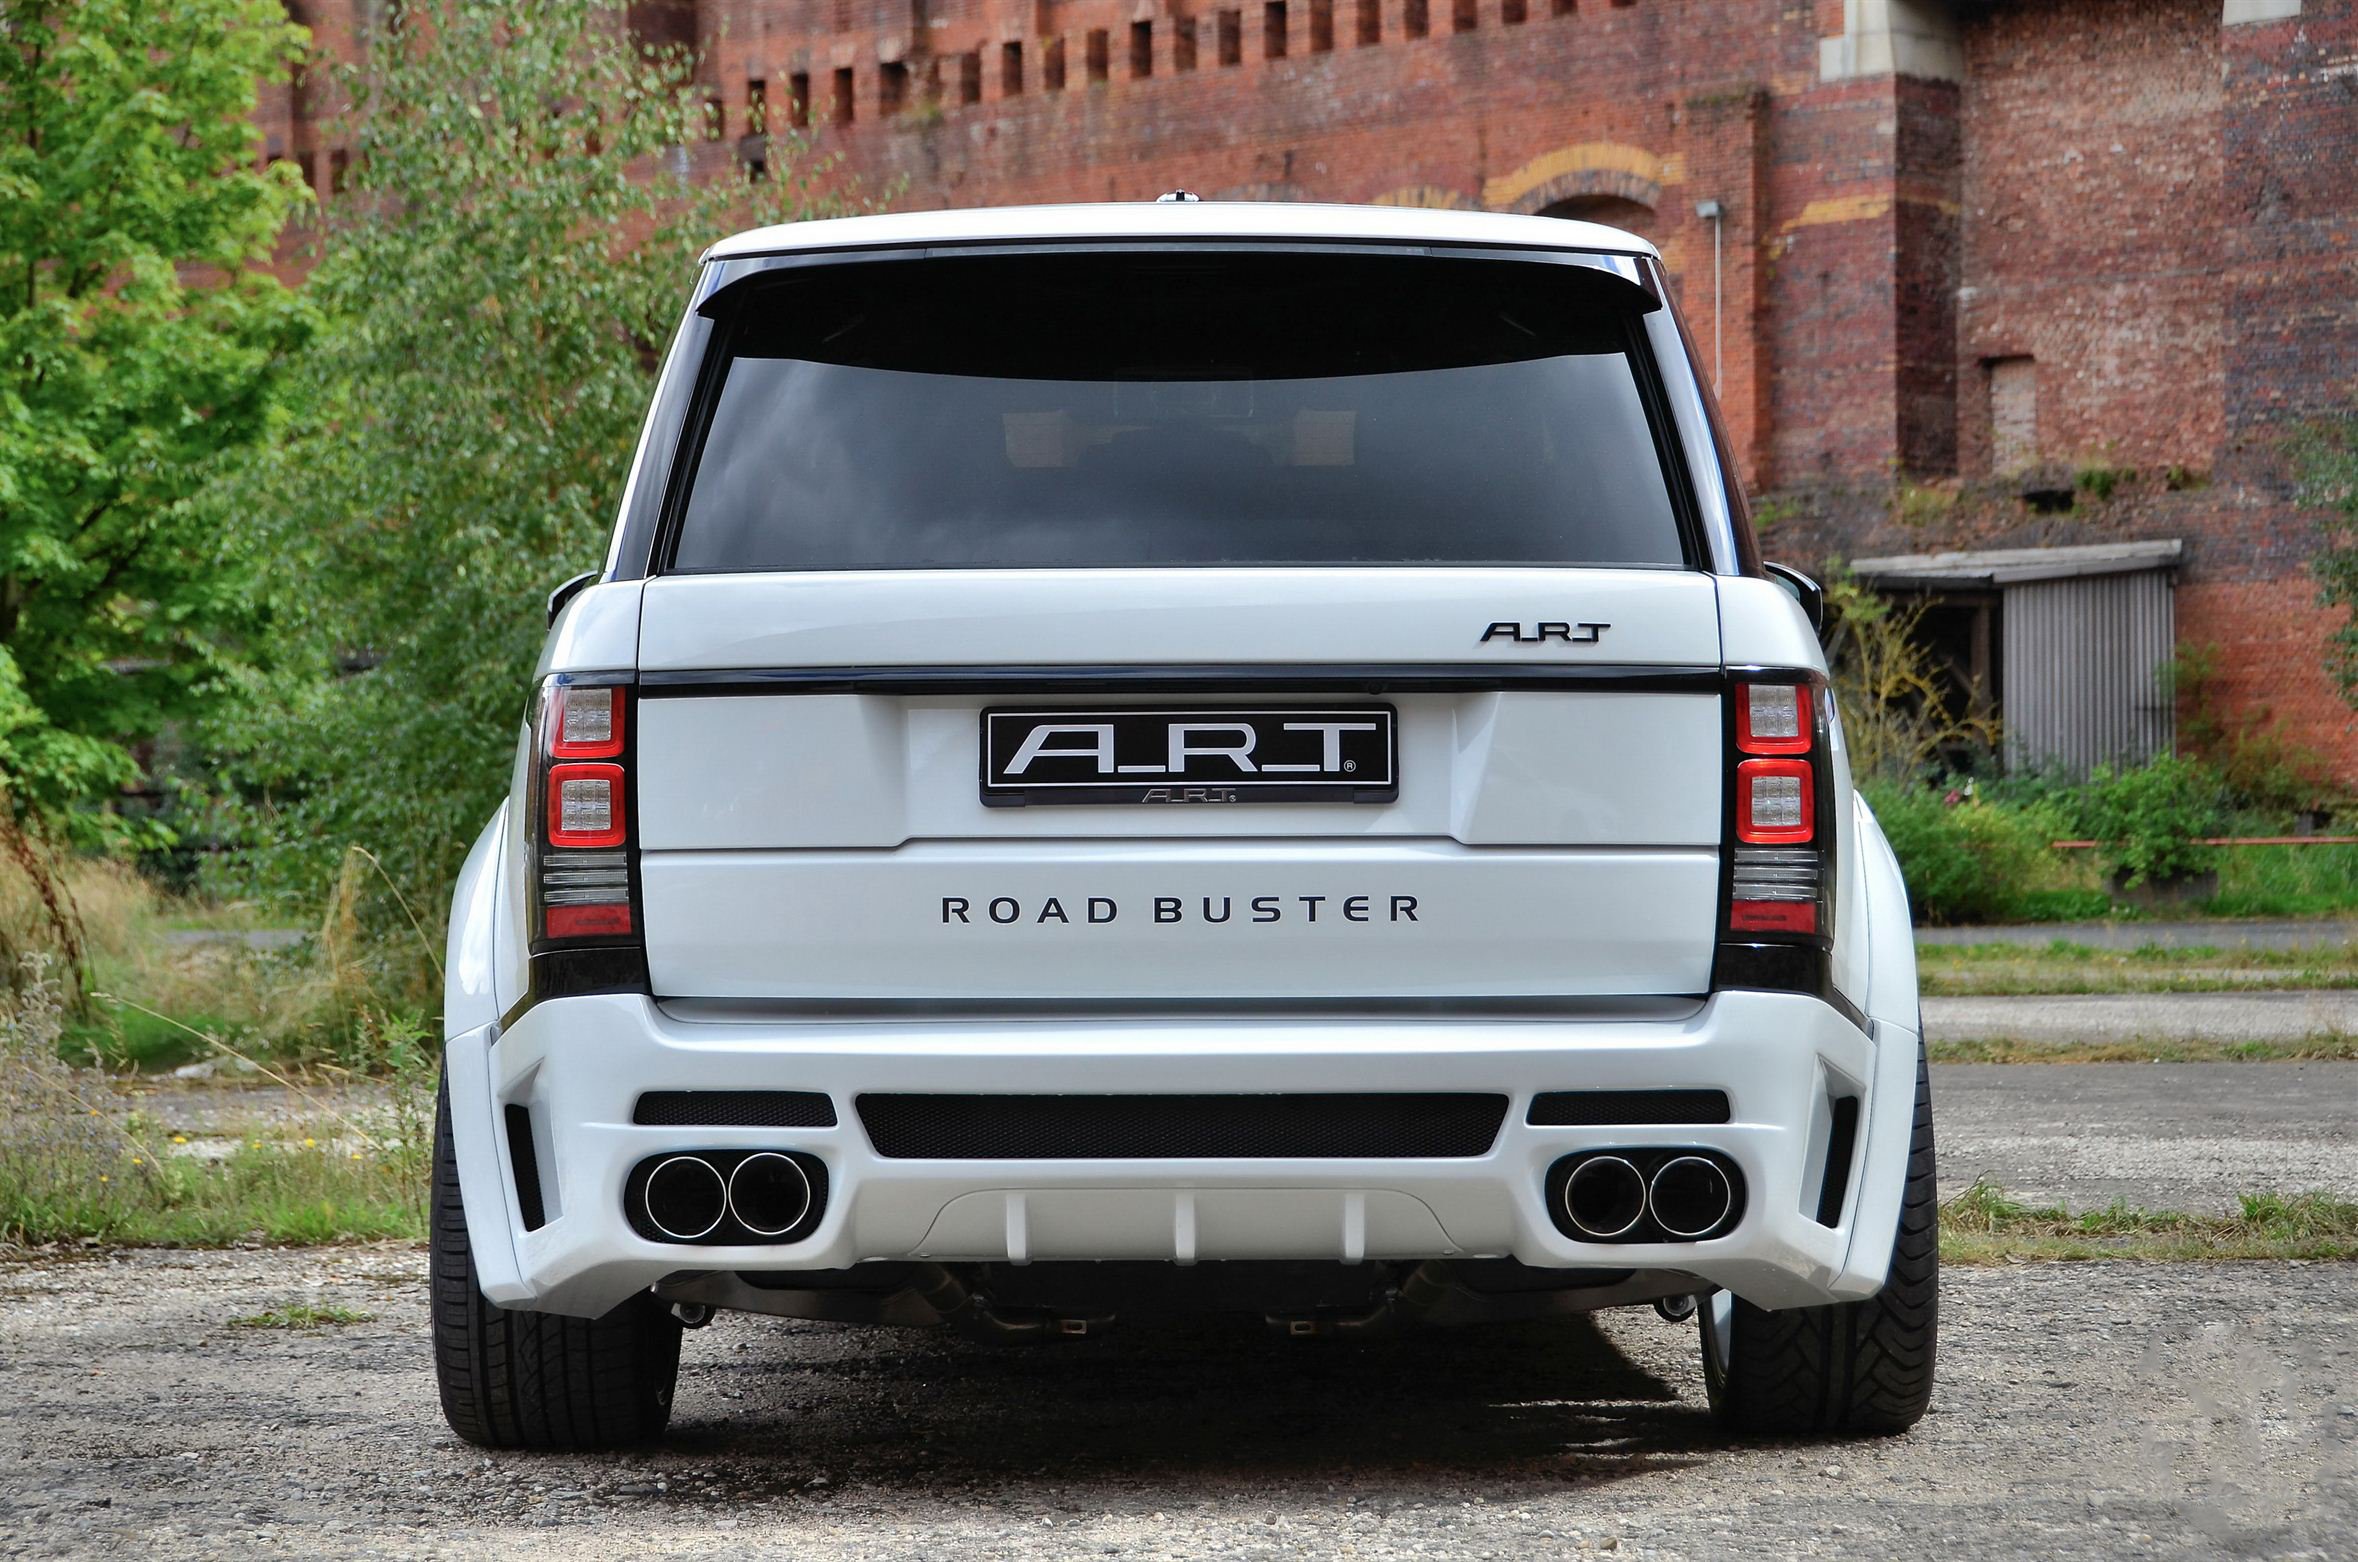 art, Range, Rover, Road, Buster, Cars, Modified, Suv, 2013 Wallpaper